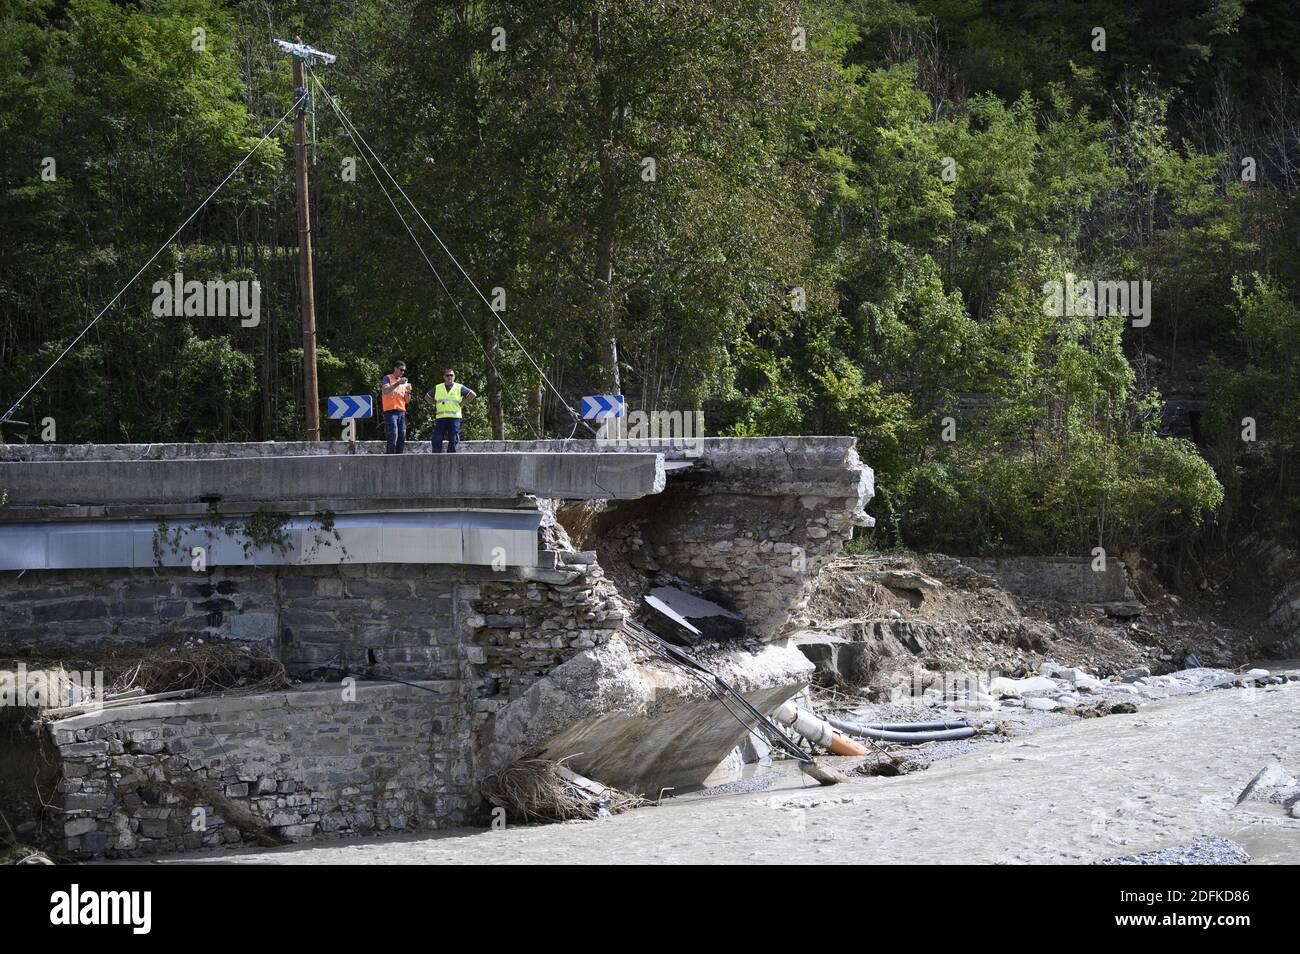 The wreckage of a damaged bridge in Tende, in the Vallee de la Roya, some 50kms north-east of Nice, southeastern France, on October 7, 2020, after storms and extensive flooding caused widespread damage in the Alpes-Maritimes departement. Intense flooding hammered southeast France over the weekend of October 2, causing four confirmed deaths in France and two in Italy, with the toll expected to rise further as searches continue for survivors. Hundreds of people have been evacuated after storms dumped huge amounts of rain that turned streams into churning torrents that swept away cars, houses and Stock Photo